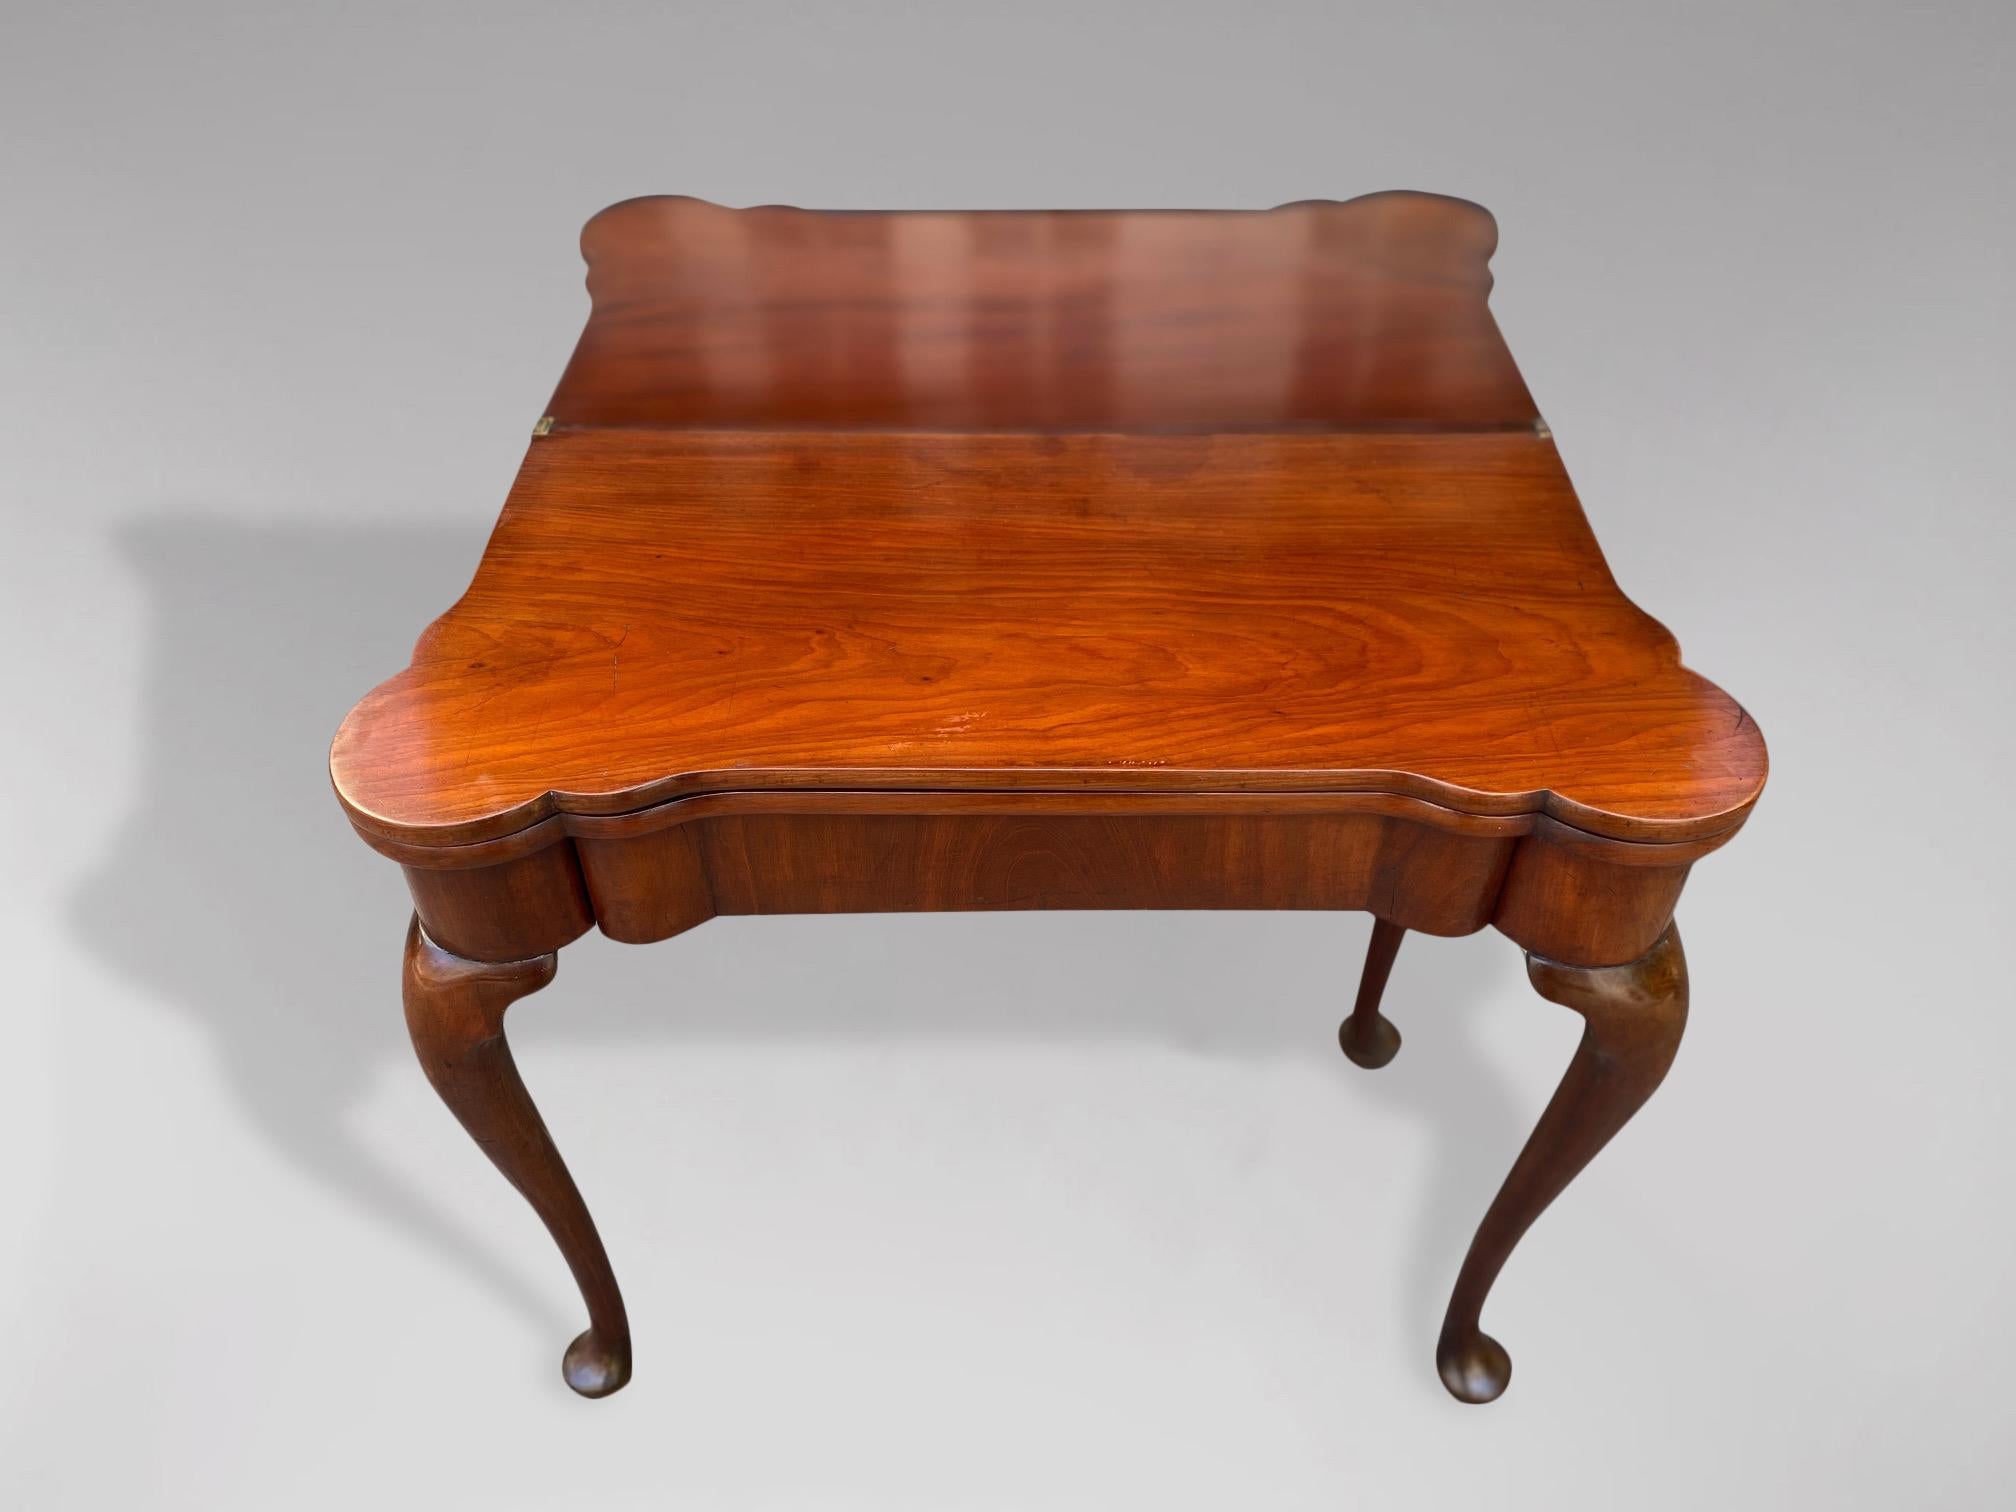 Very Fine Mid 18th Century George II Period Mahogany Triple Top Card Table In Good Condition In Petworth,West Sussex, GB